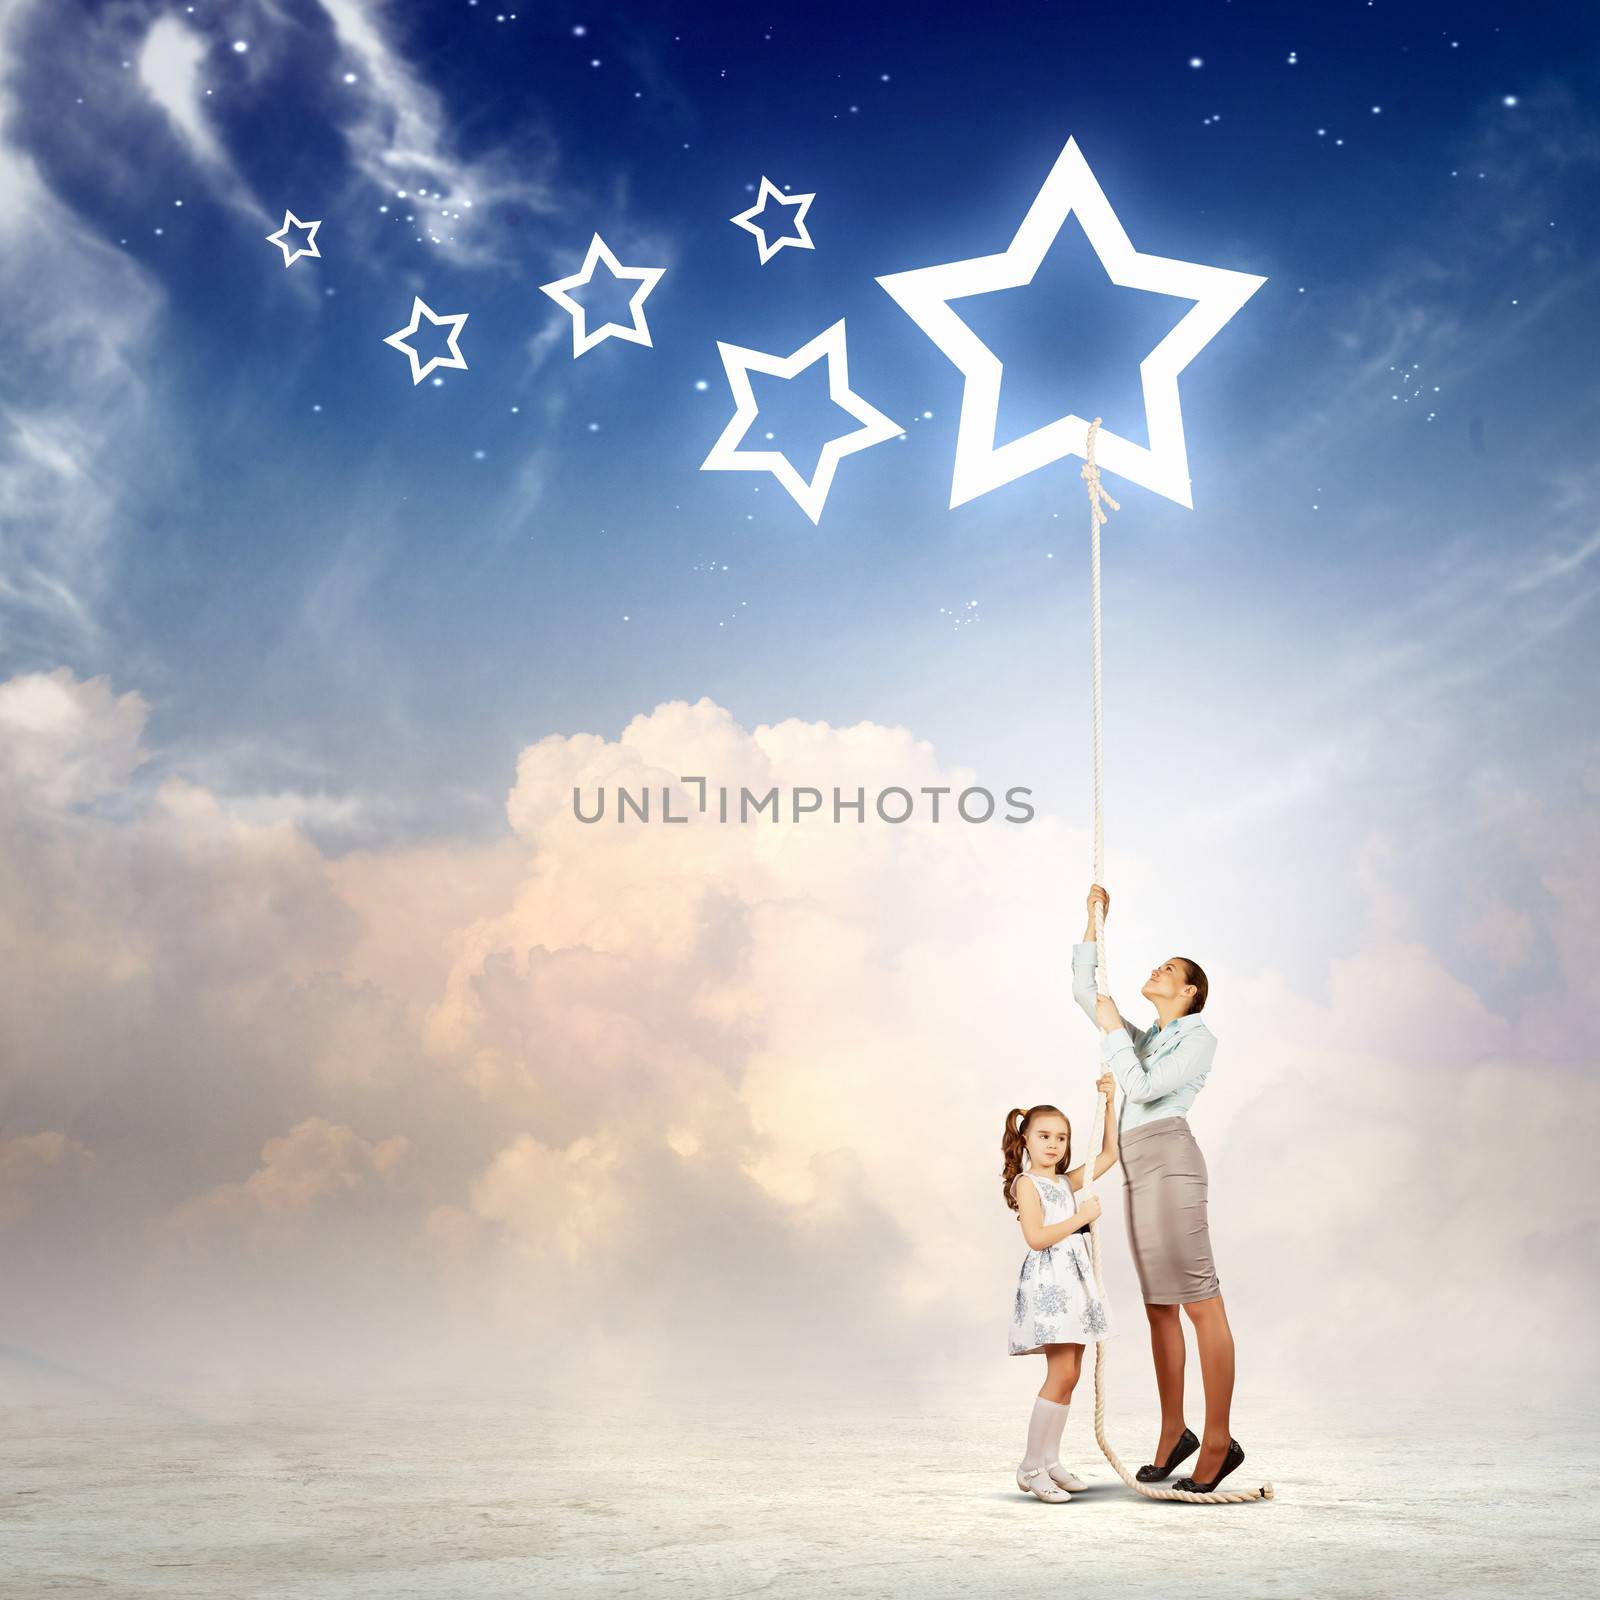 Image of young happy family pulling rope with a star symbol